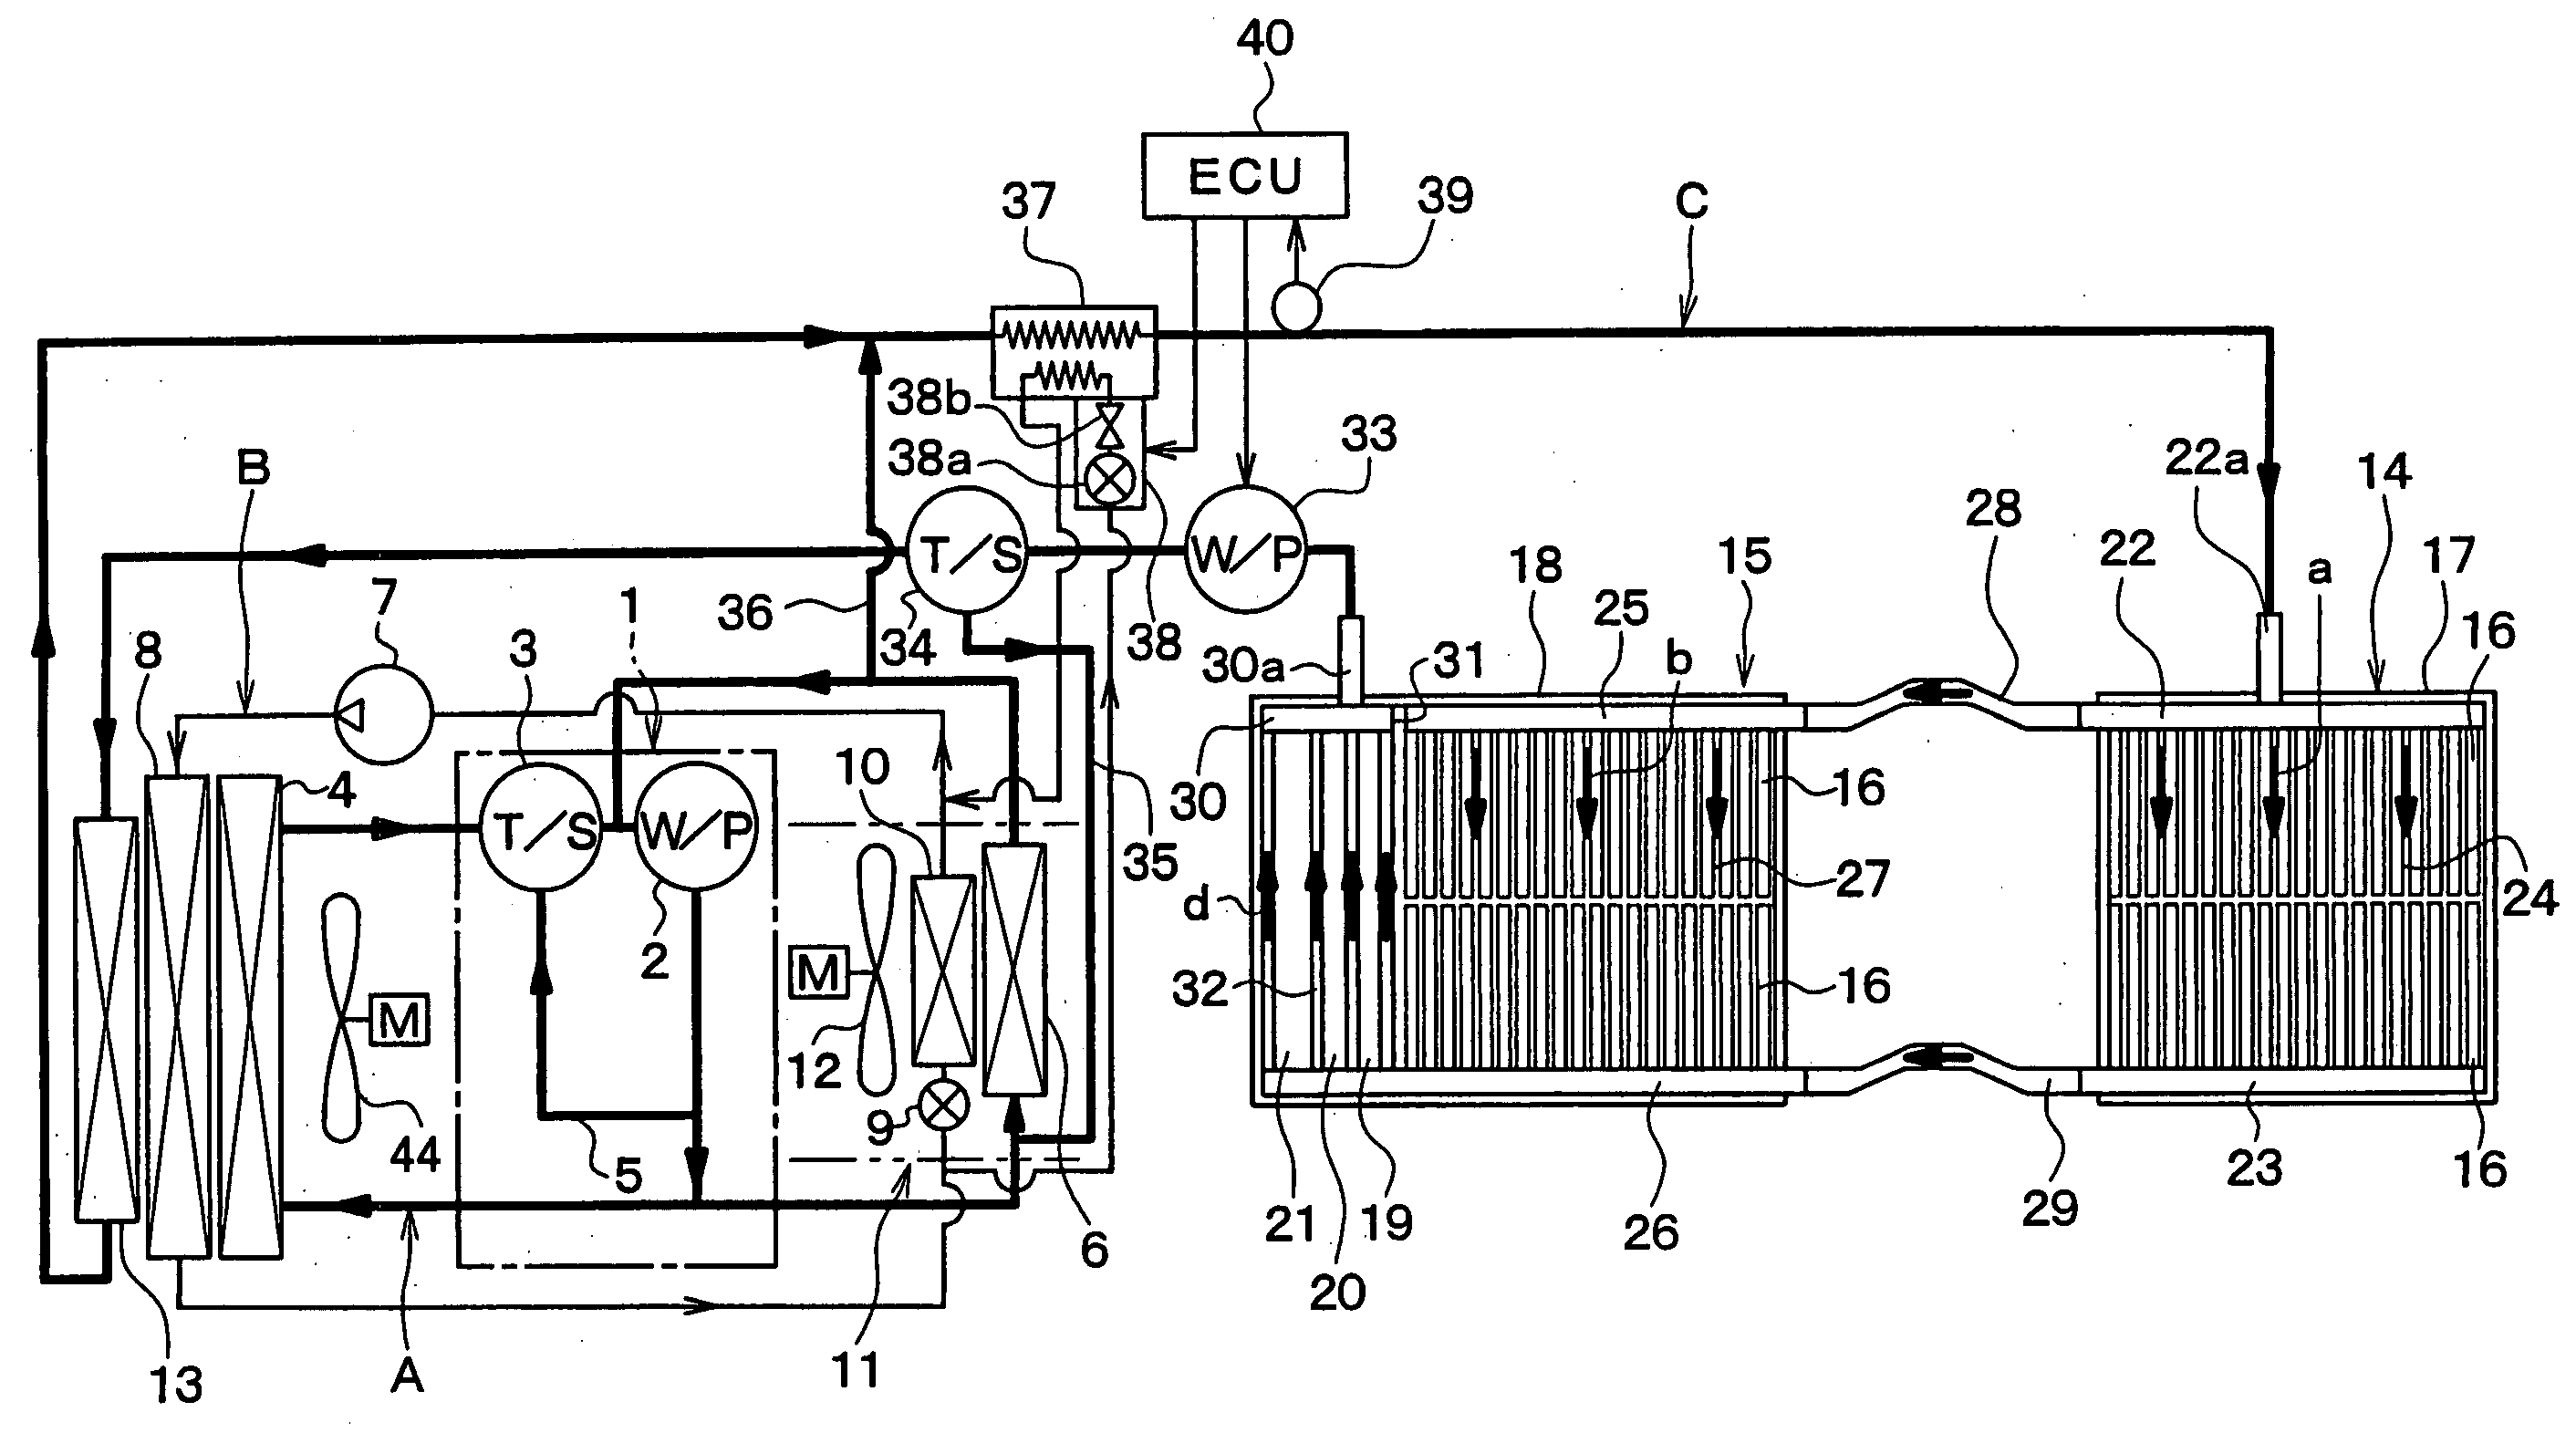 Cooling structure of heat generating member